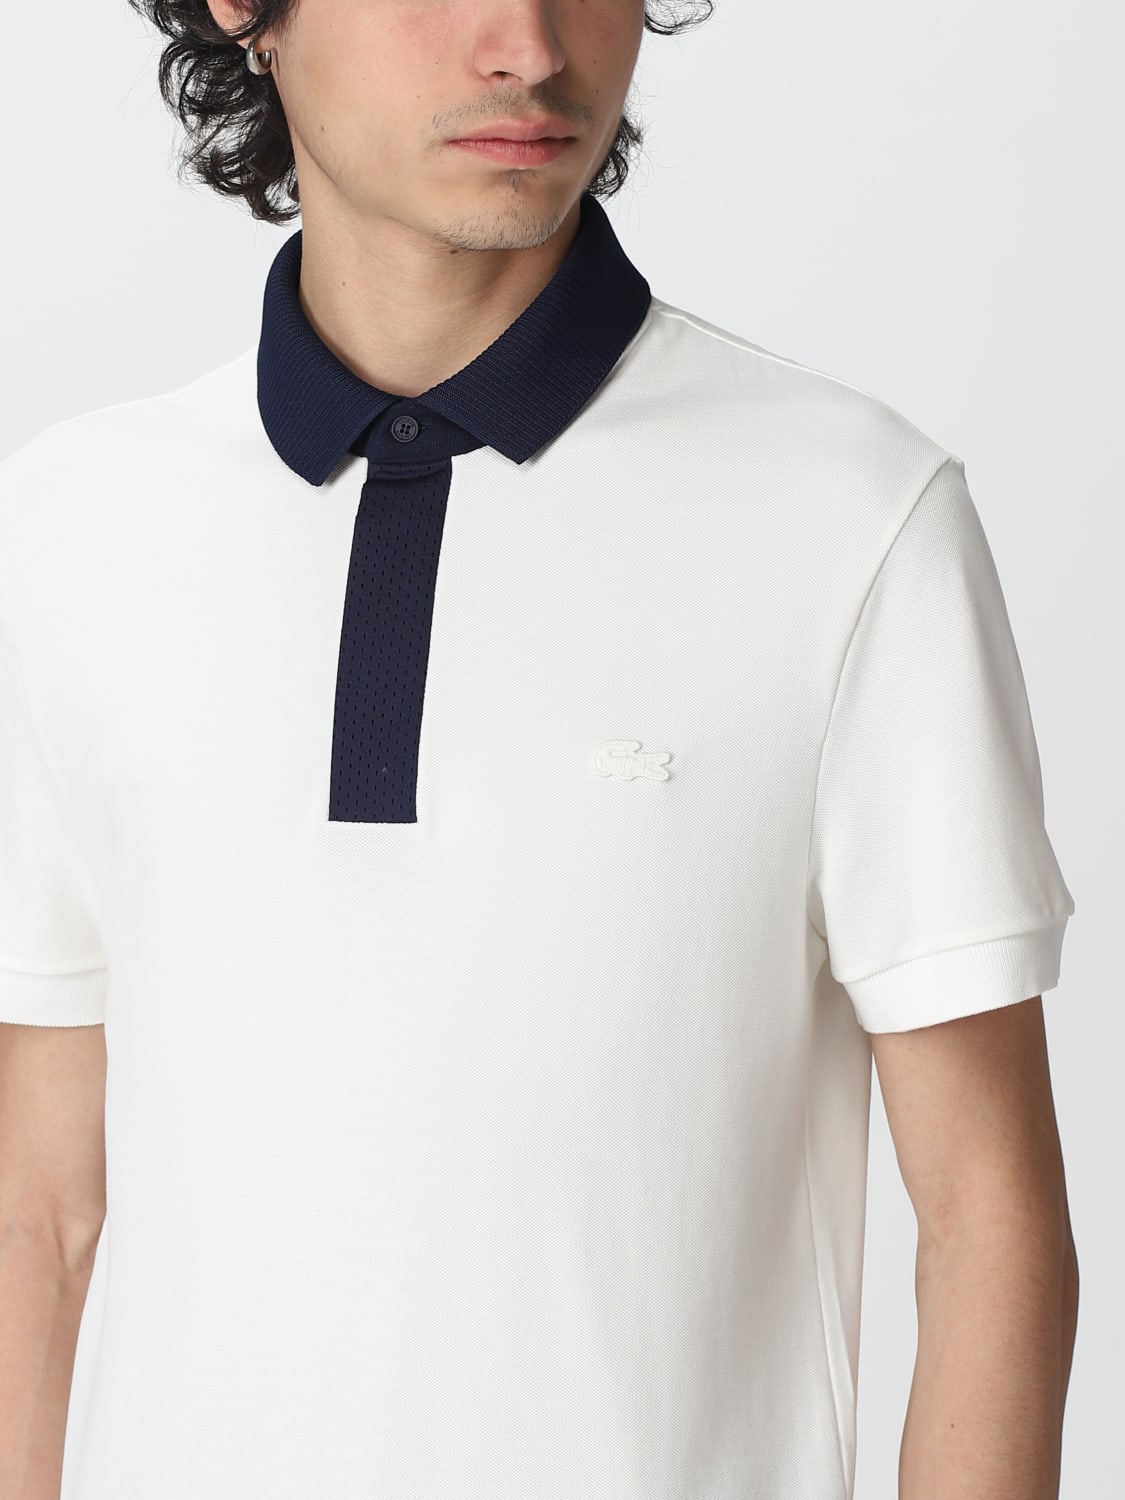 LACOSTE: polo shirt for man - White | Lacoste polo PH5367 on GIGLIO.COM